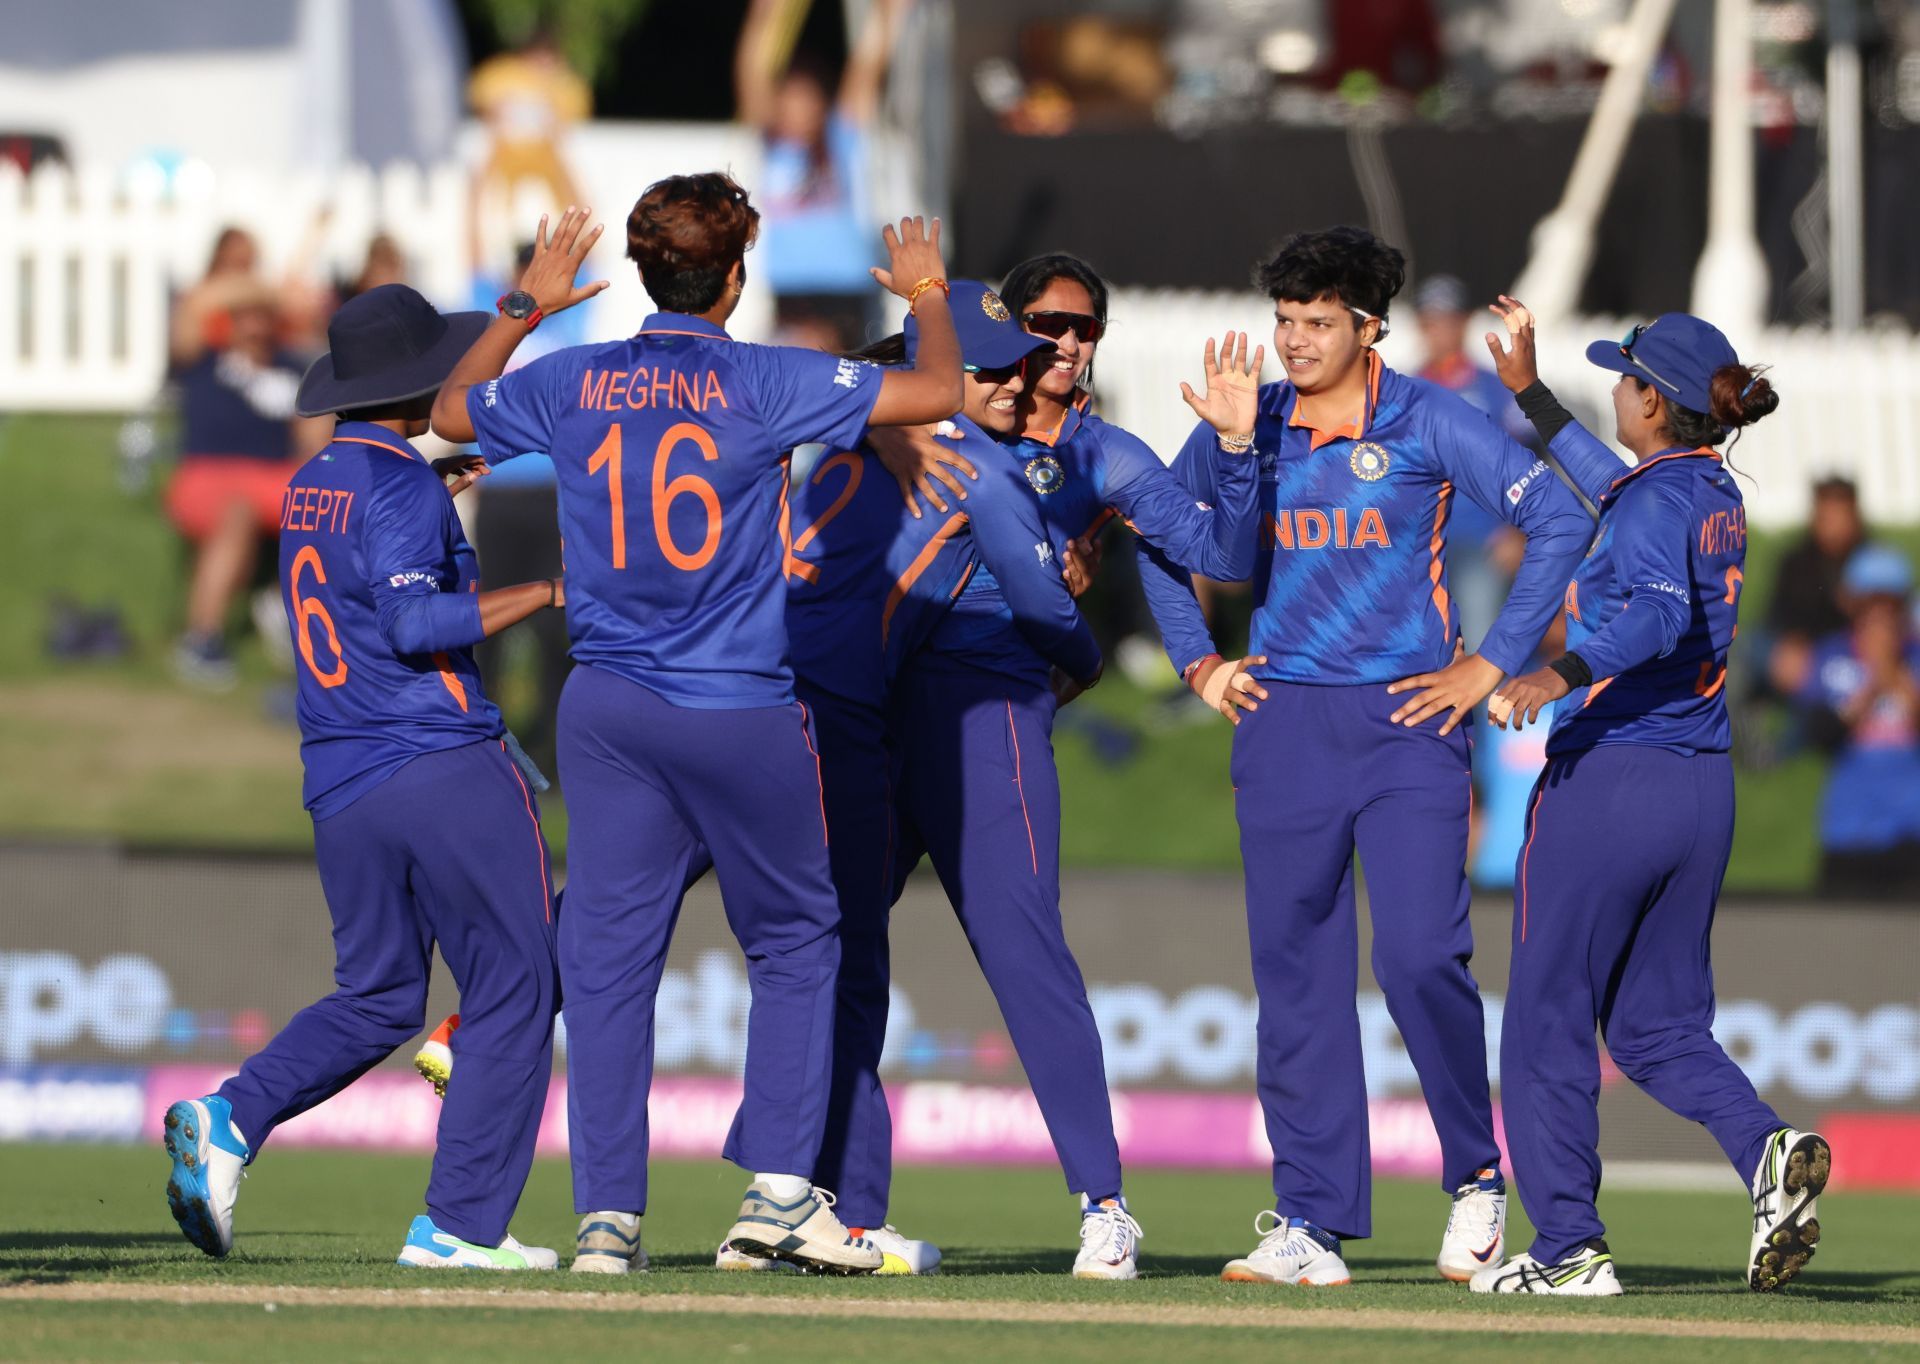 India Women will look for a win when they take on arch-rivals Pakistan Women.